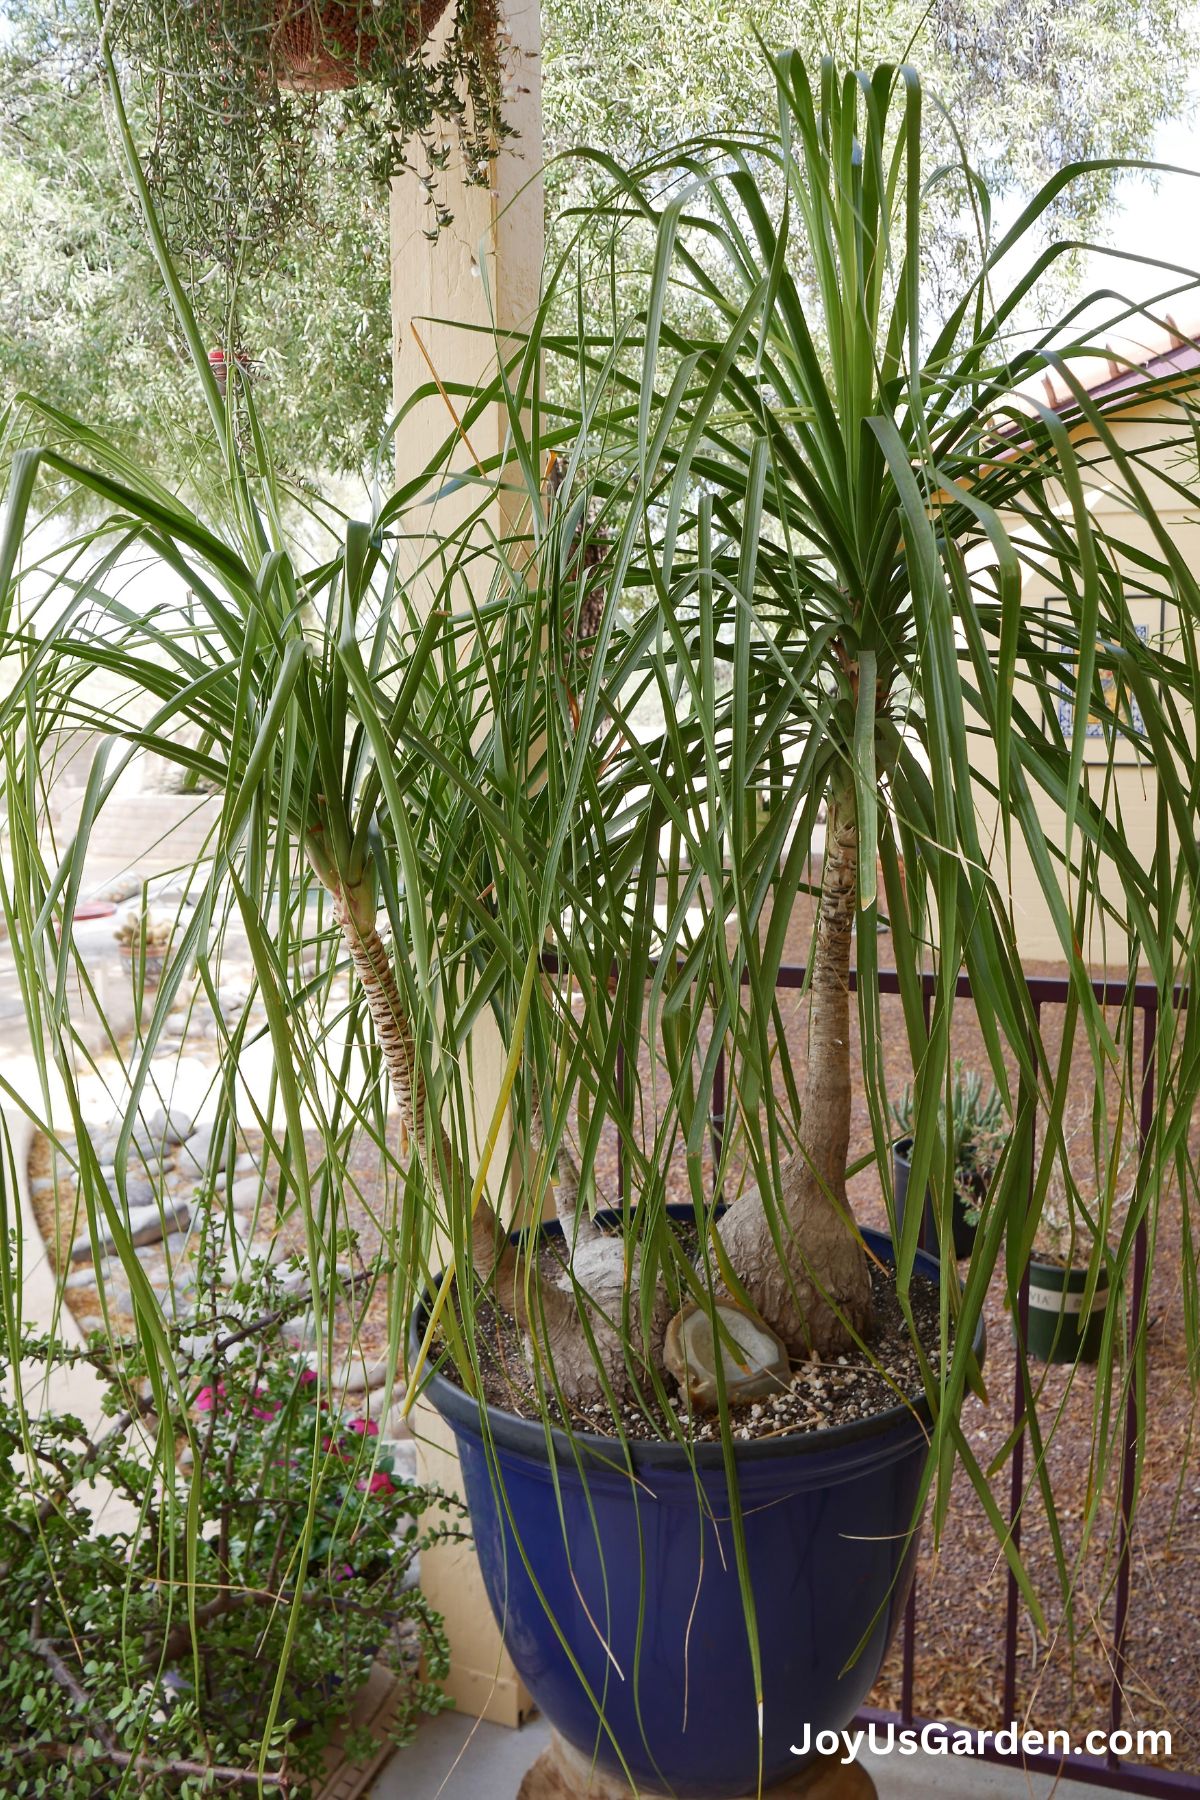 Three-headed ponytail palm in blue pot outdoors on patio.